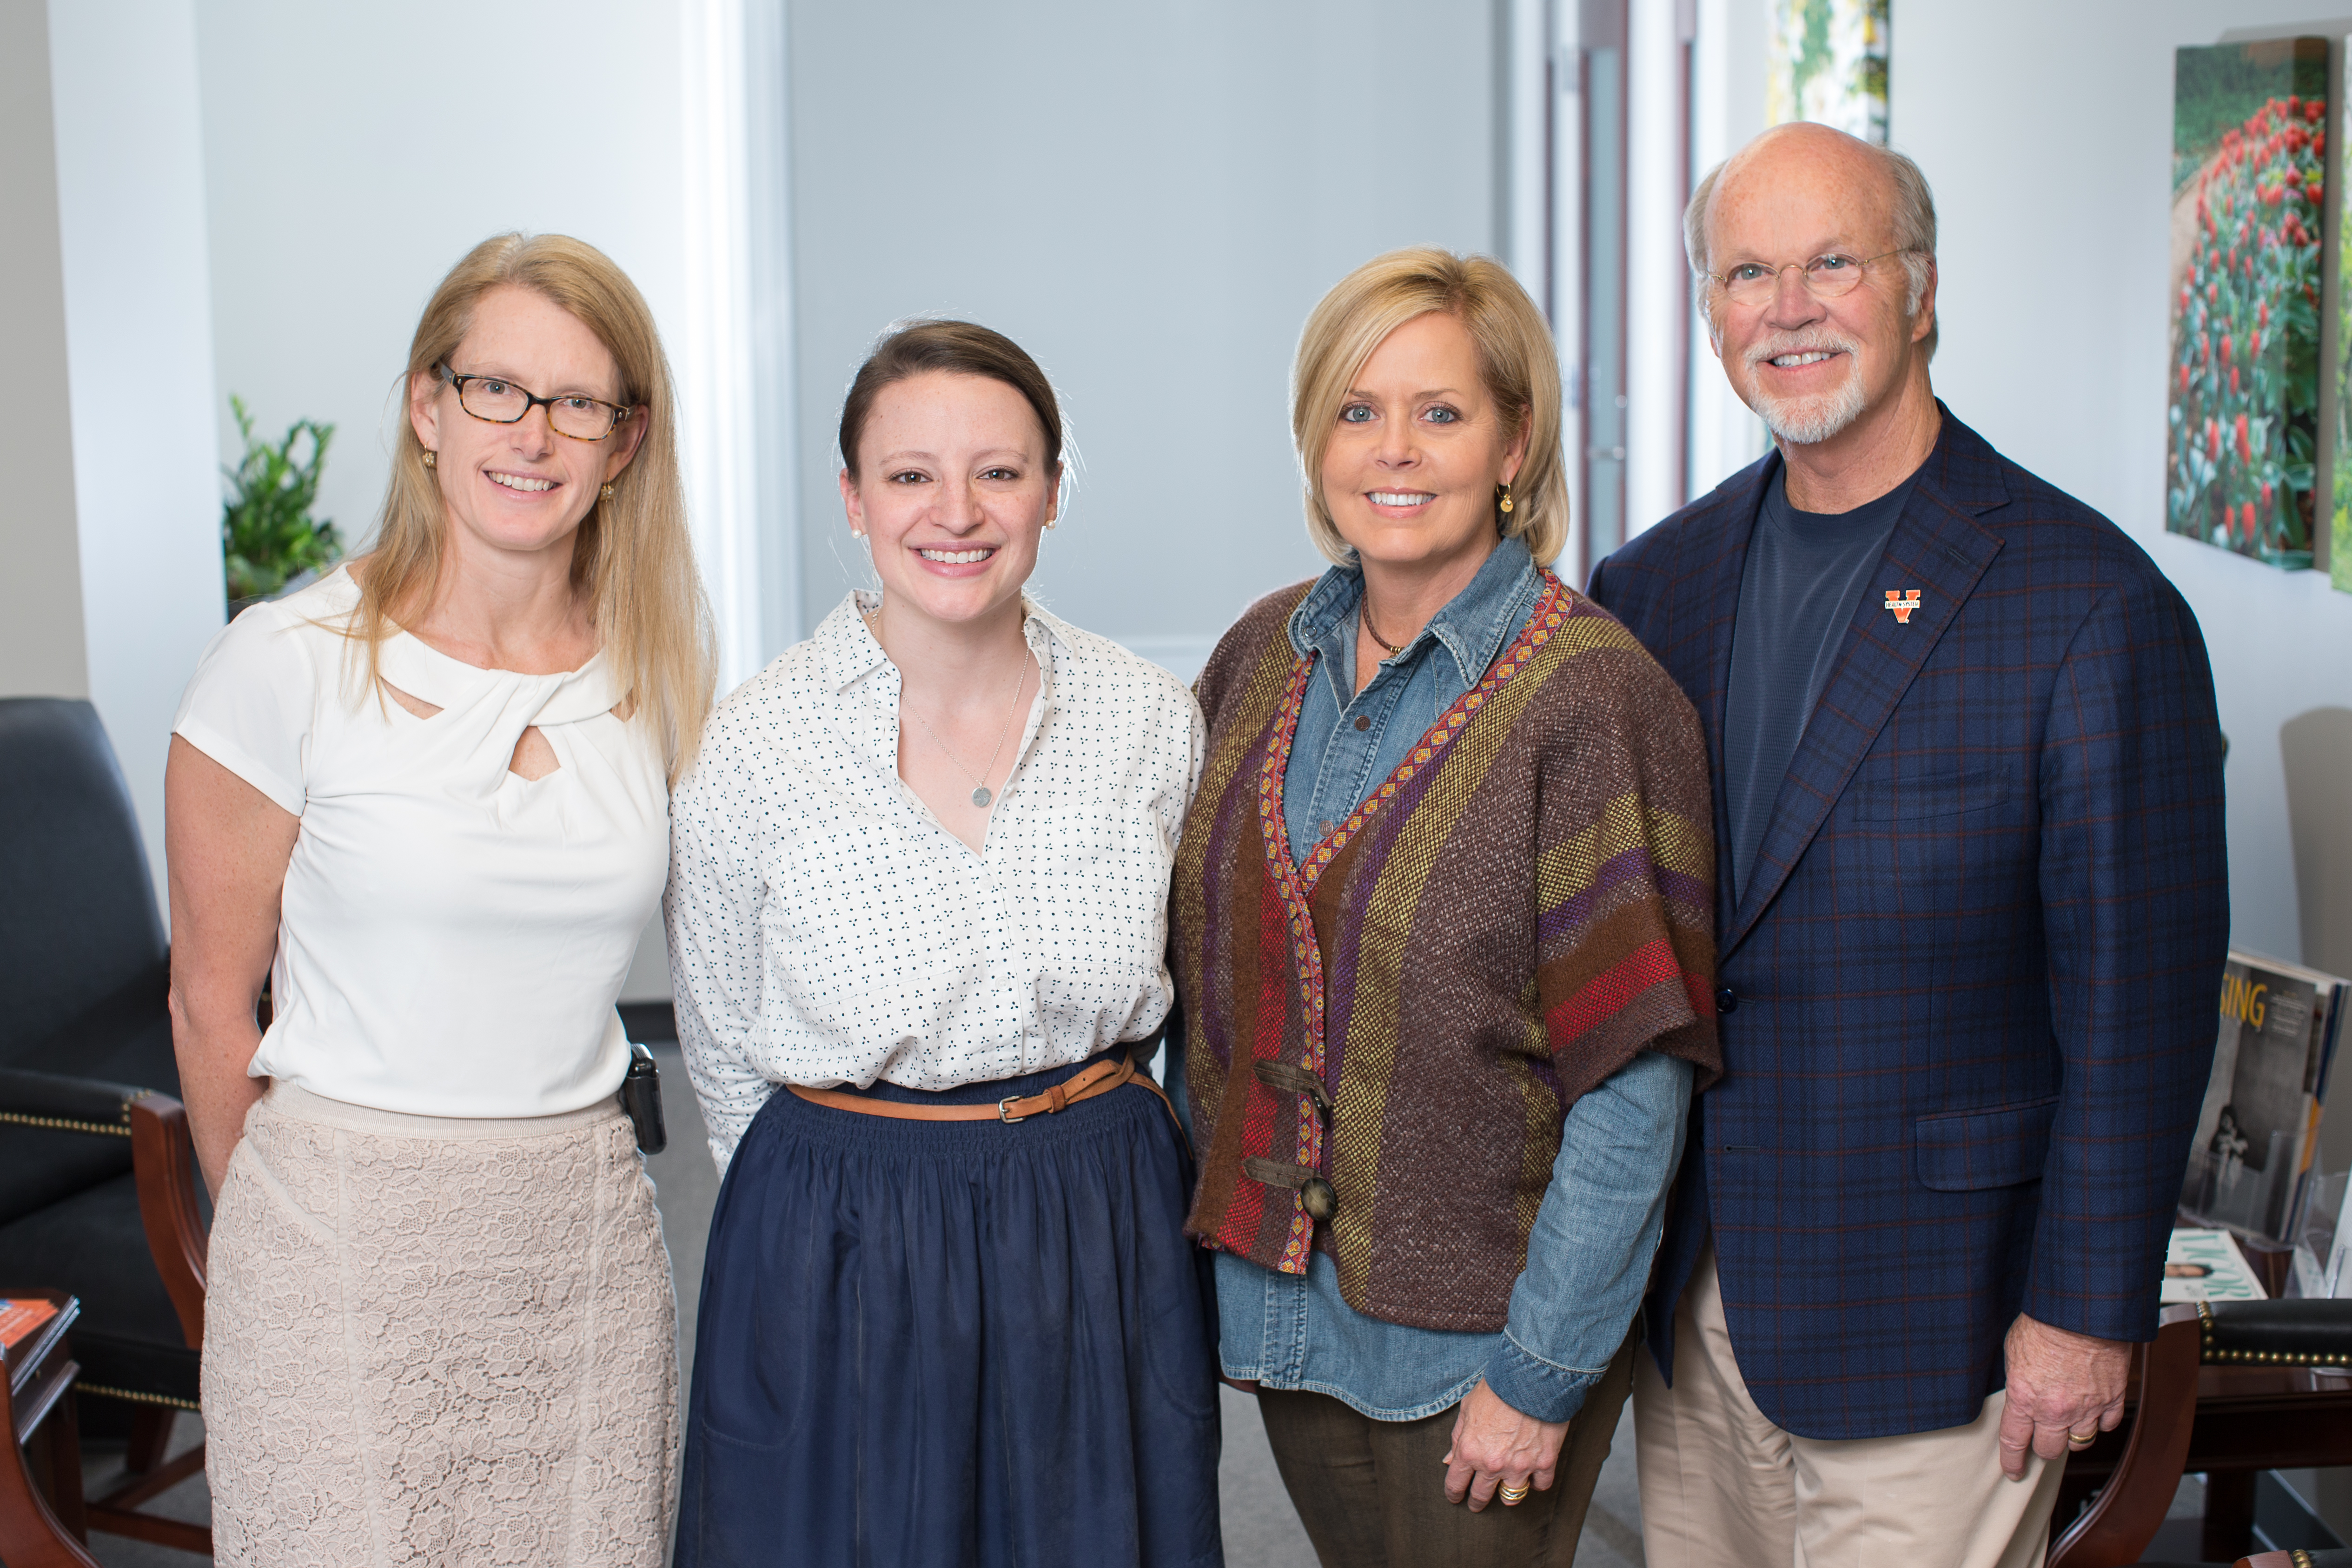 The Orrs family is pictured here with UVA Gynecologic Oncology Division Director Susan Modesitt (far left) and 2017 Orr Scholar Lisa Rauh.